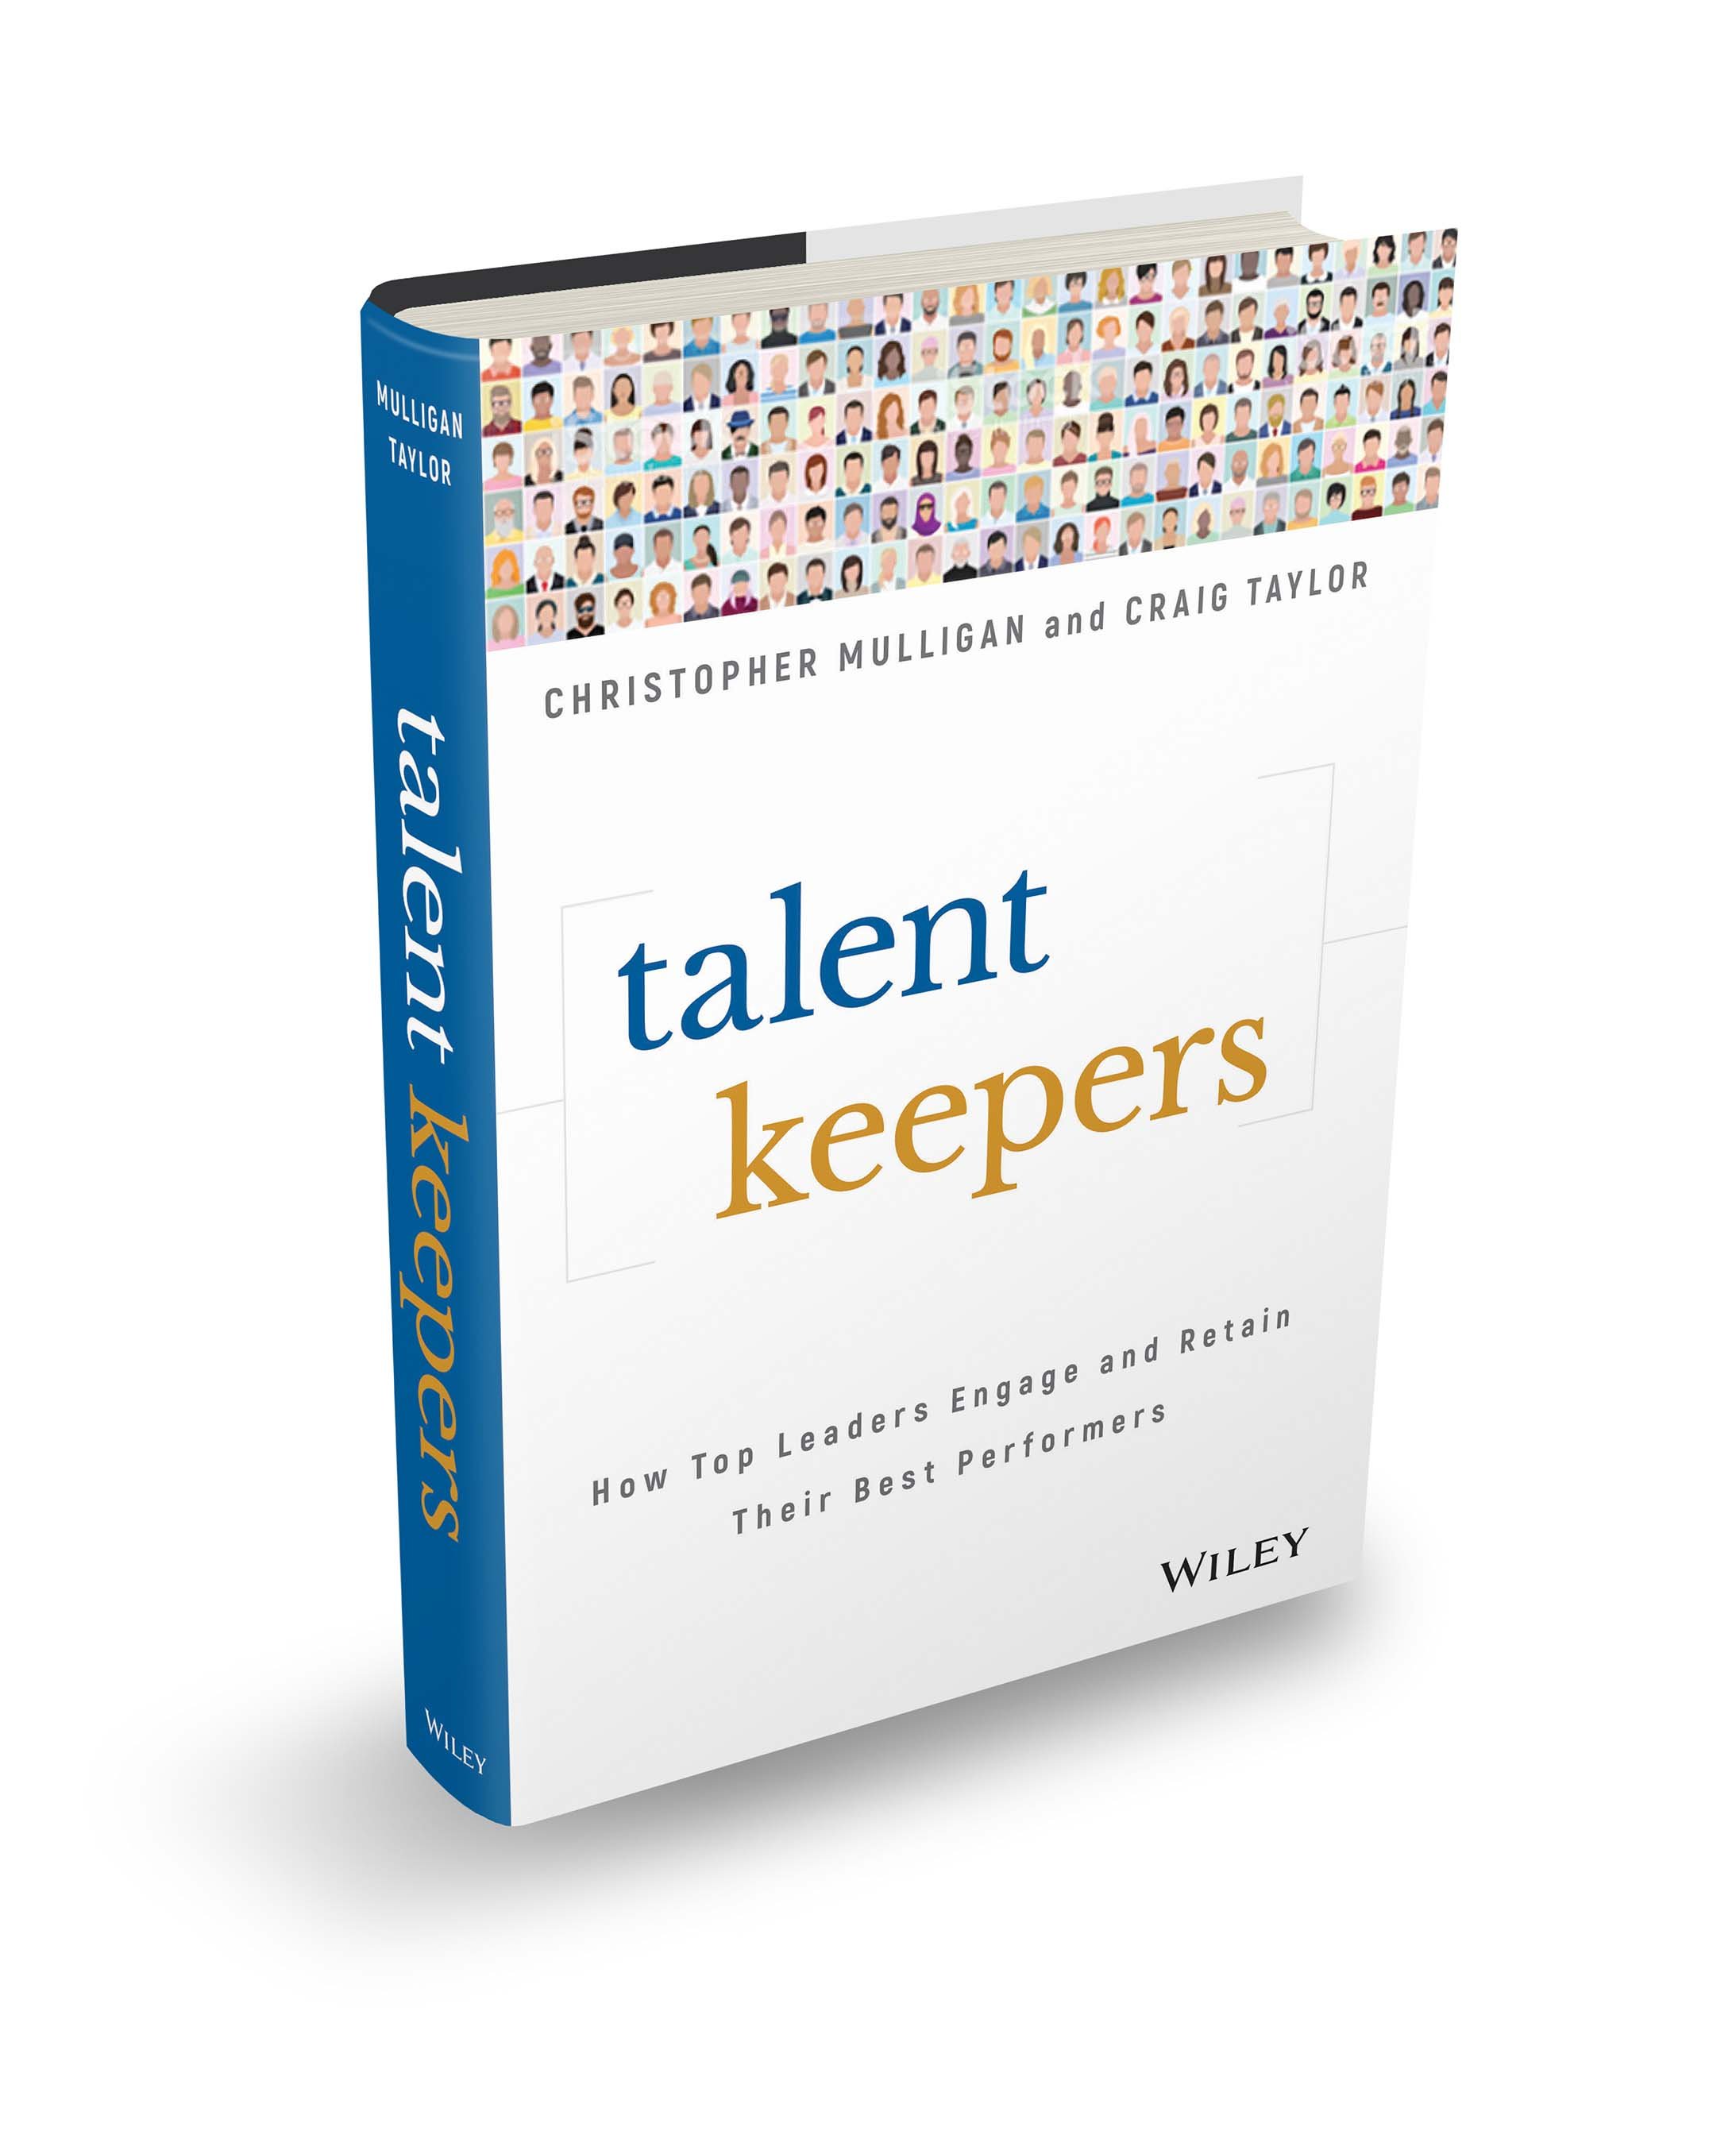 Book: TalentKeepers: How to Engage and Retain Great People